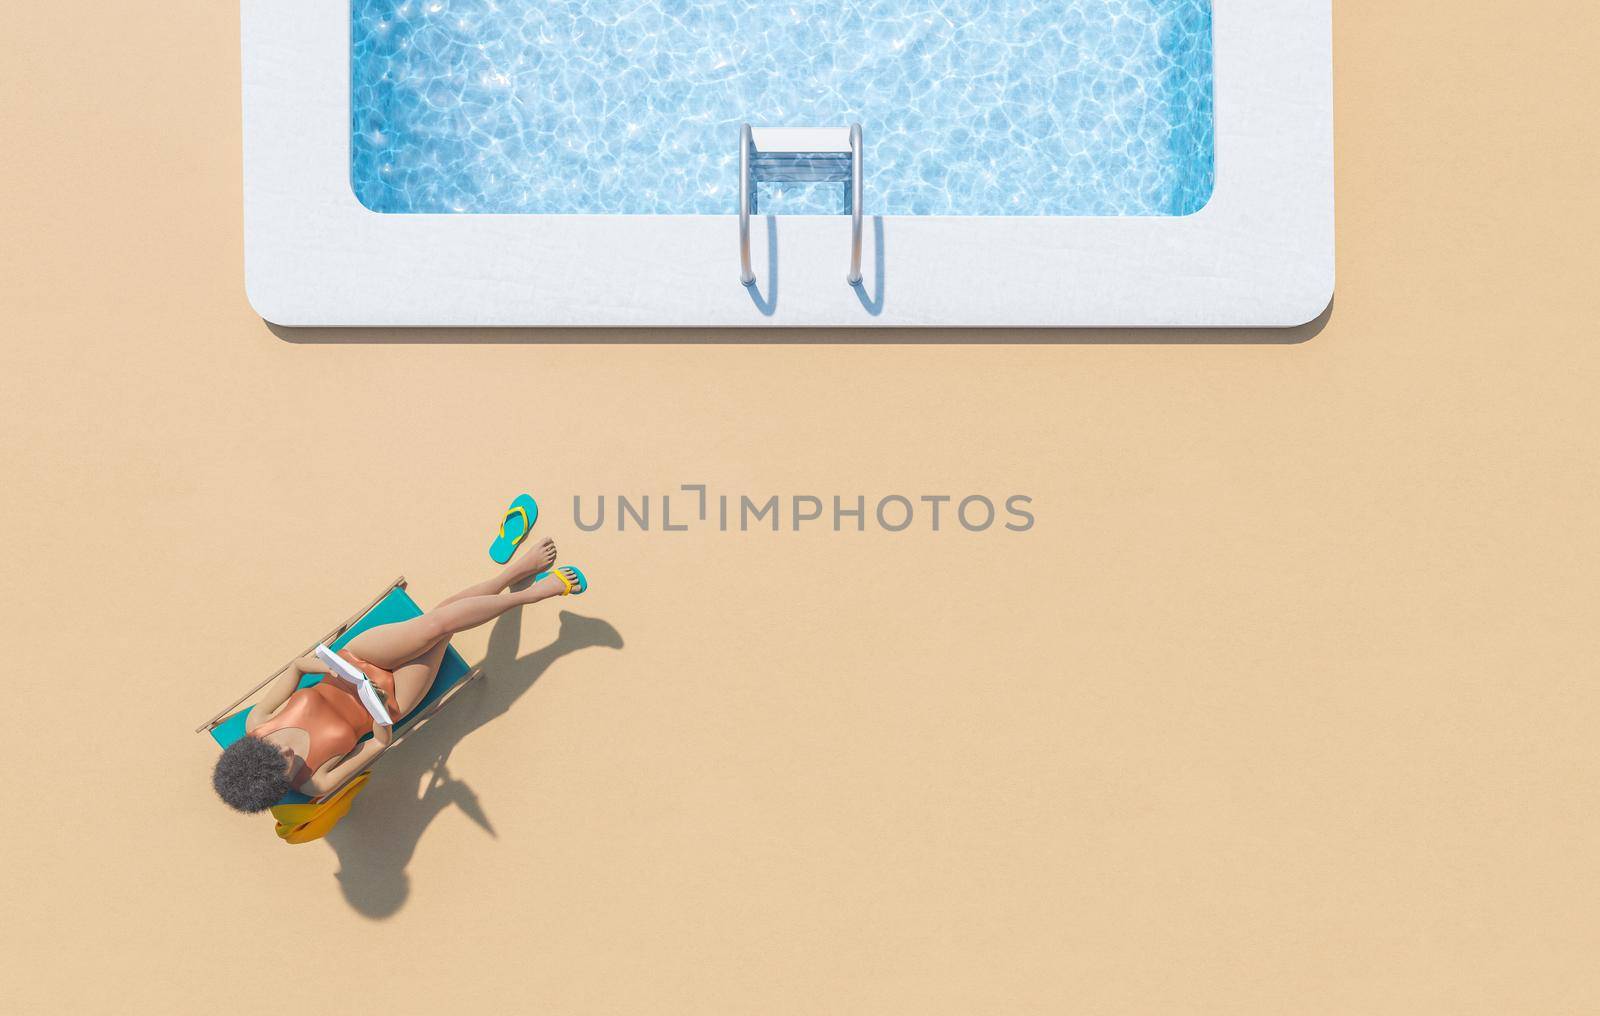 Black lady reading book on lounger near pool by asolano